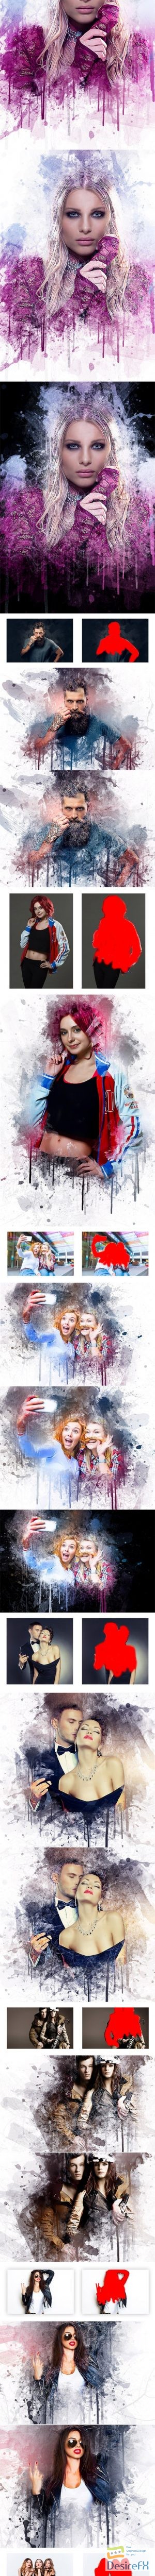 GraphicRiver - Ink Art Photoshop Action 21029026